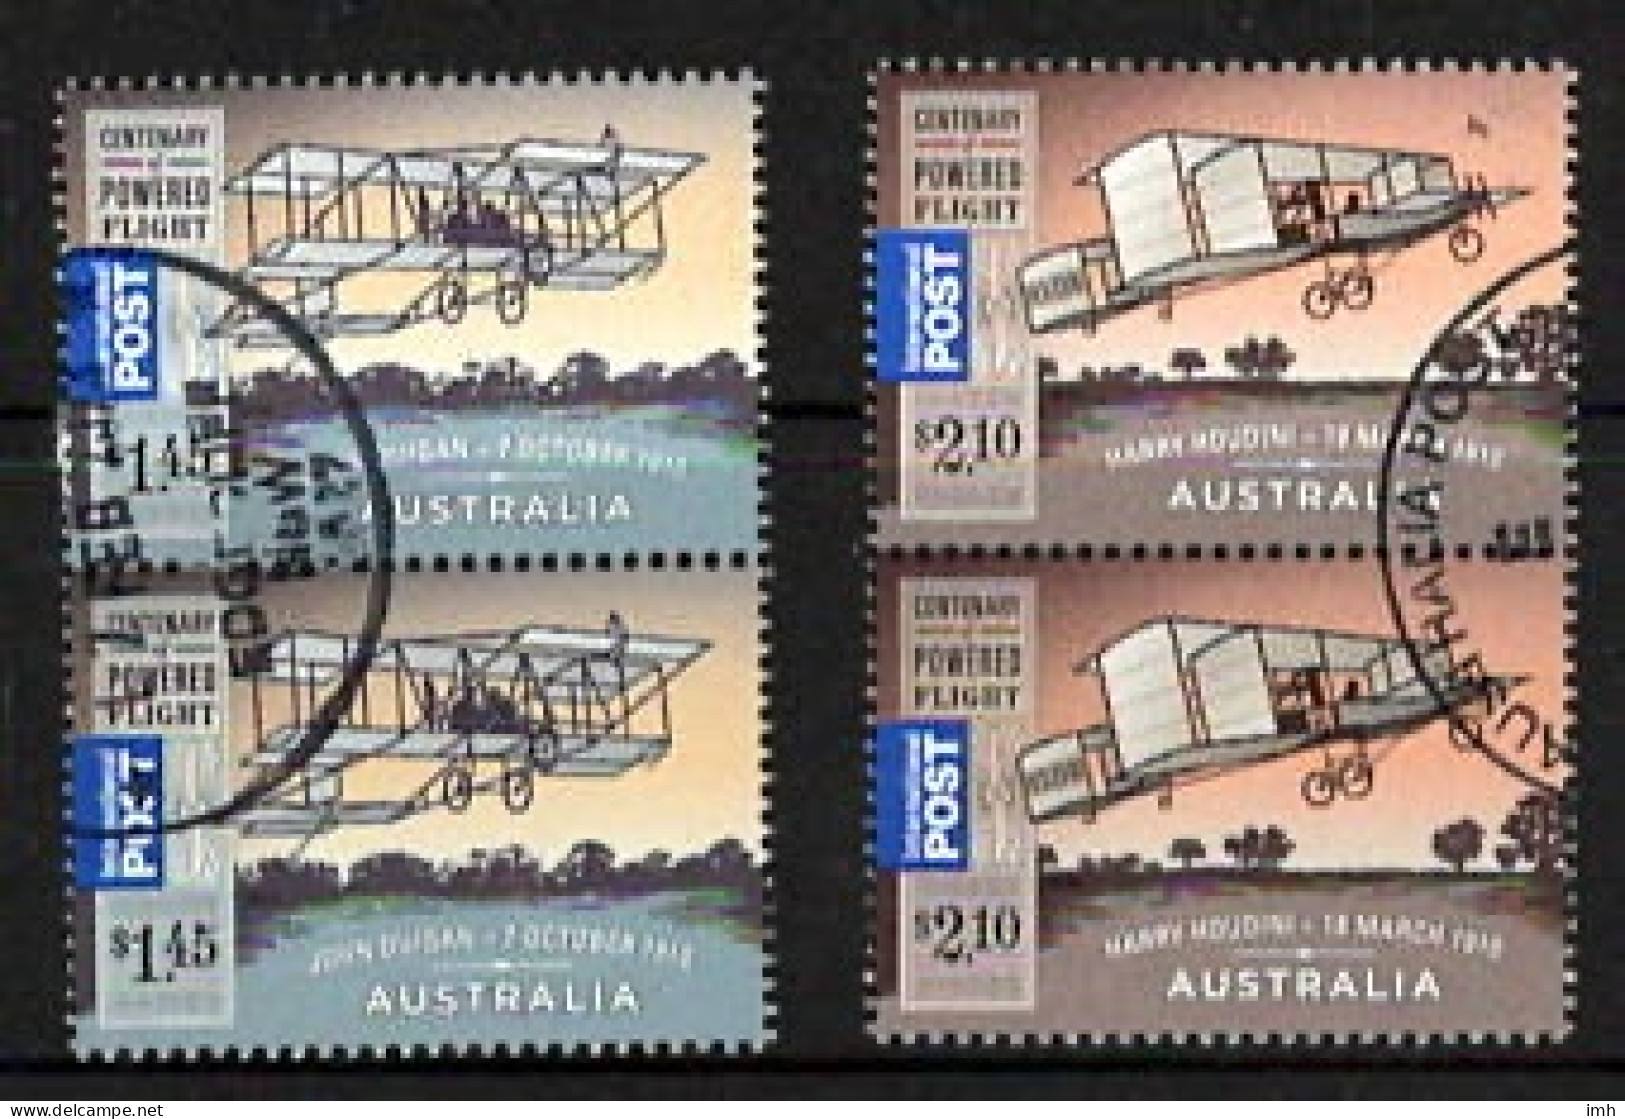 2010 Australia   Powered Flight, $1.45 And $2.10 Values In Used Pairs.   Fine Used. - Oblitérés